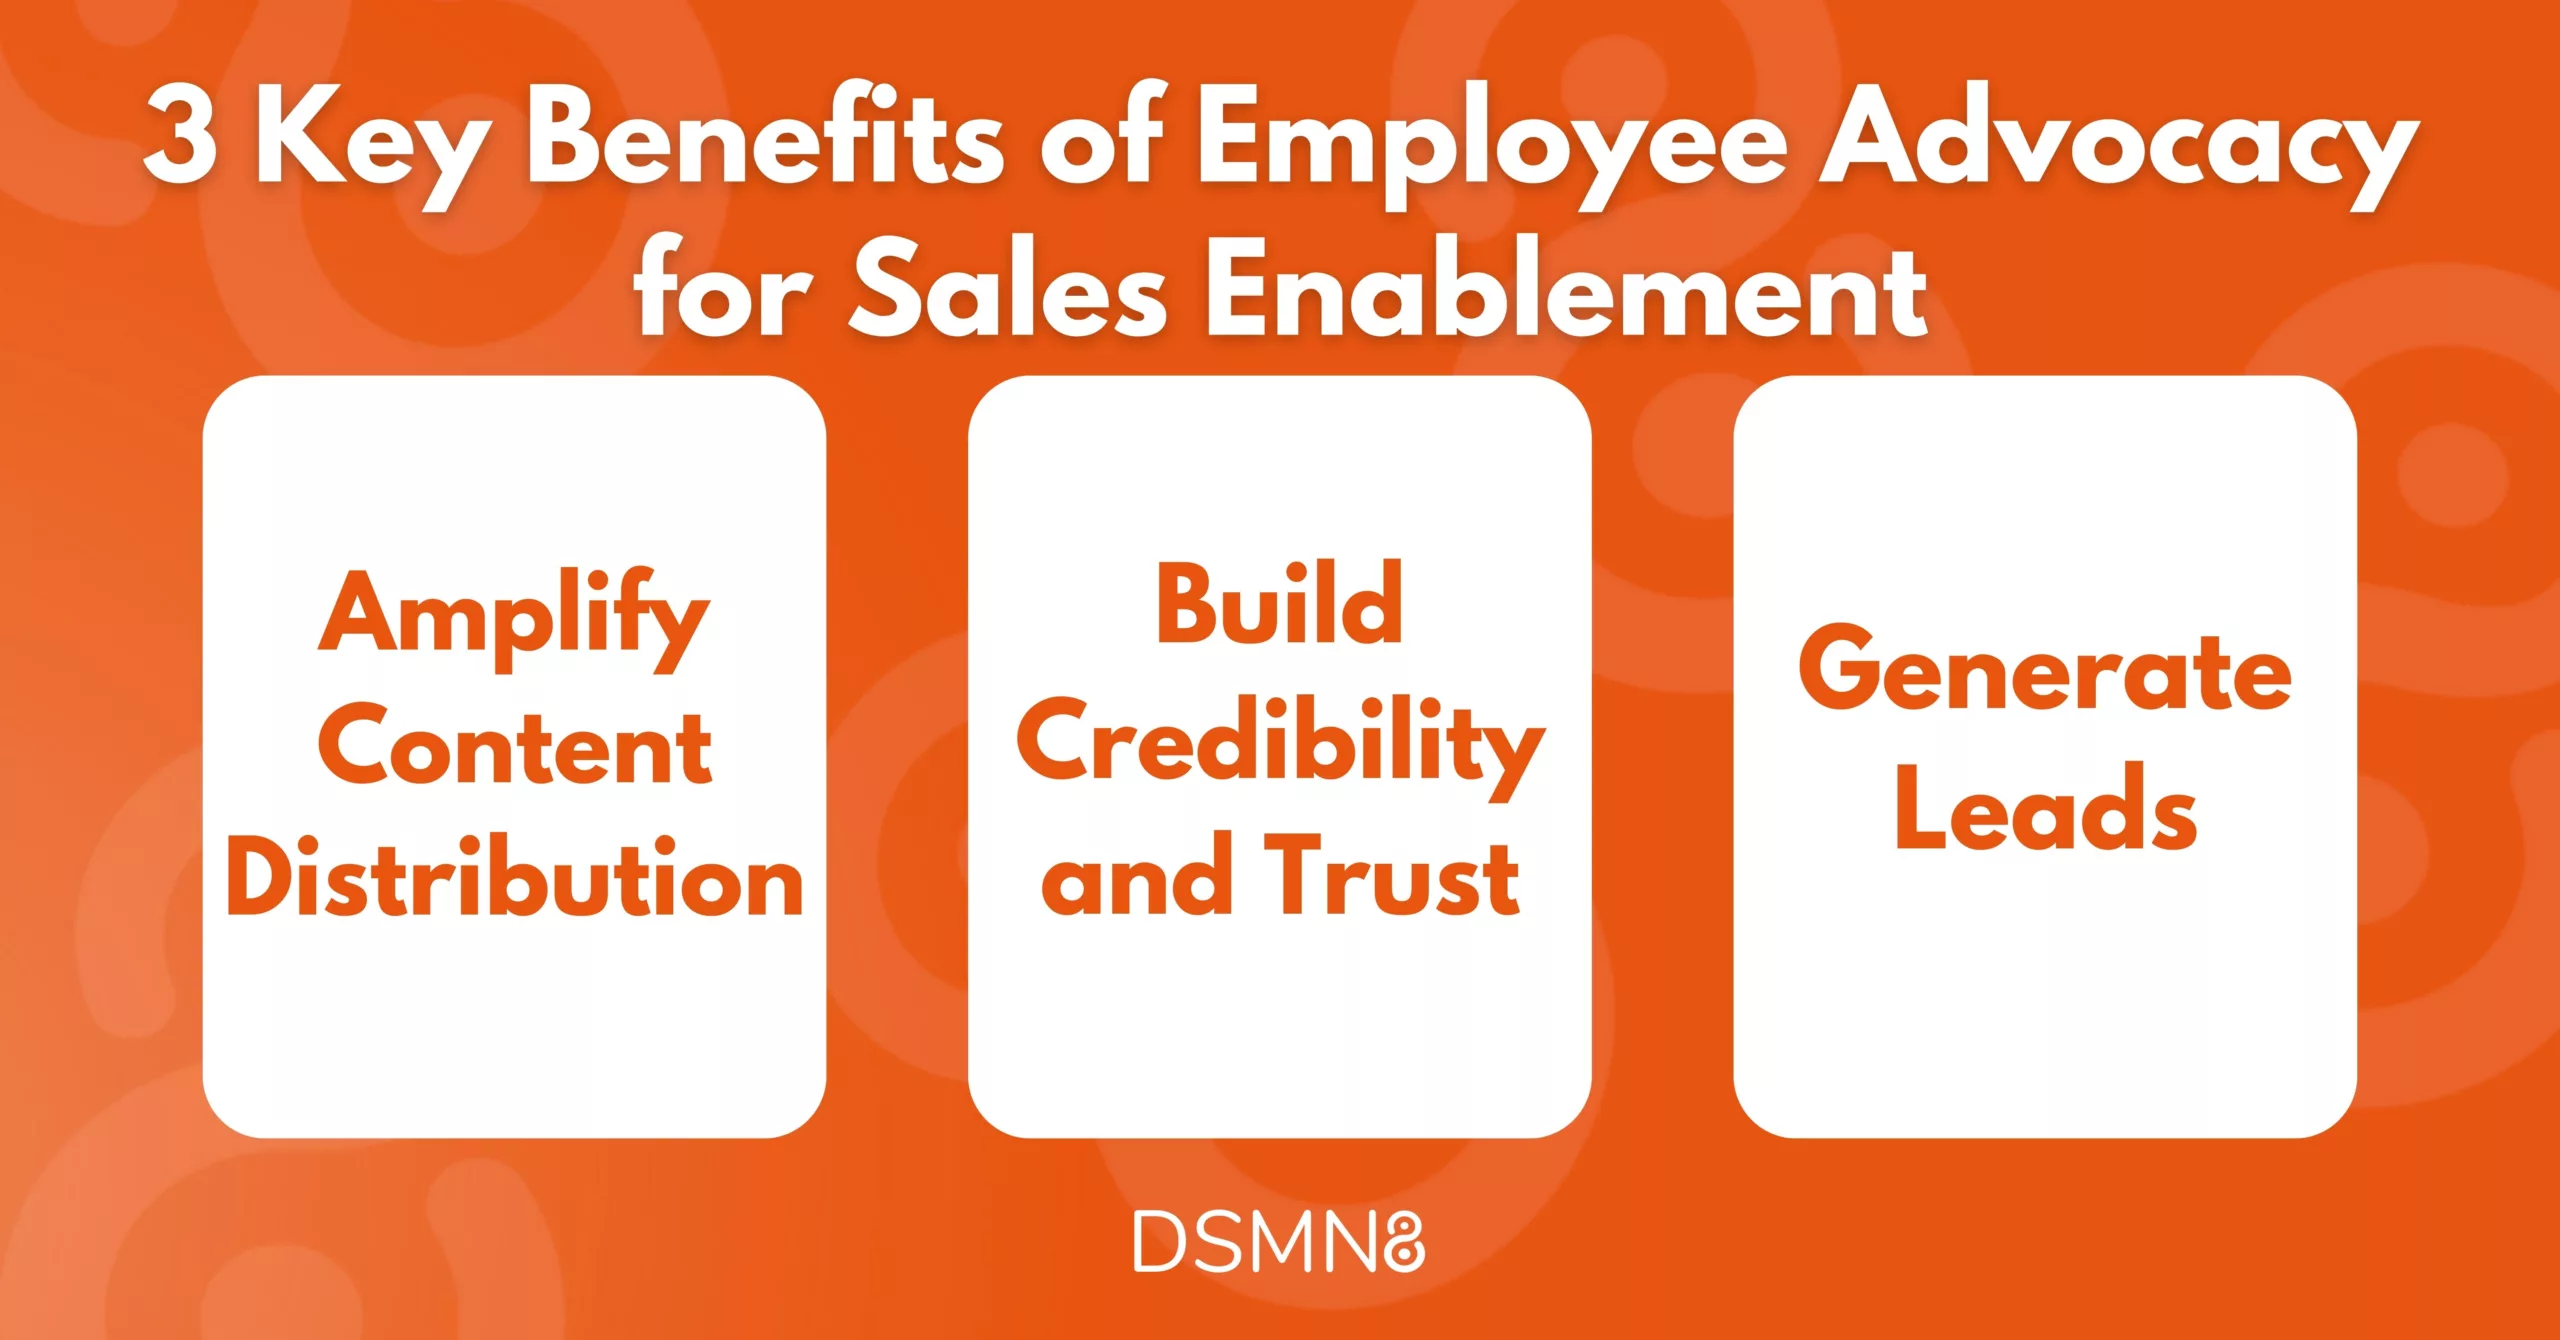 3 key benefits of employee advocacy for sales enablement